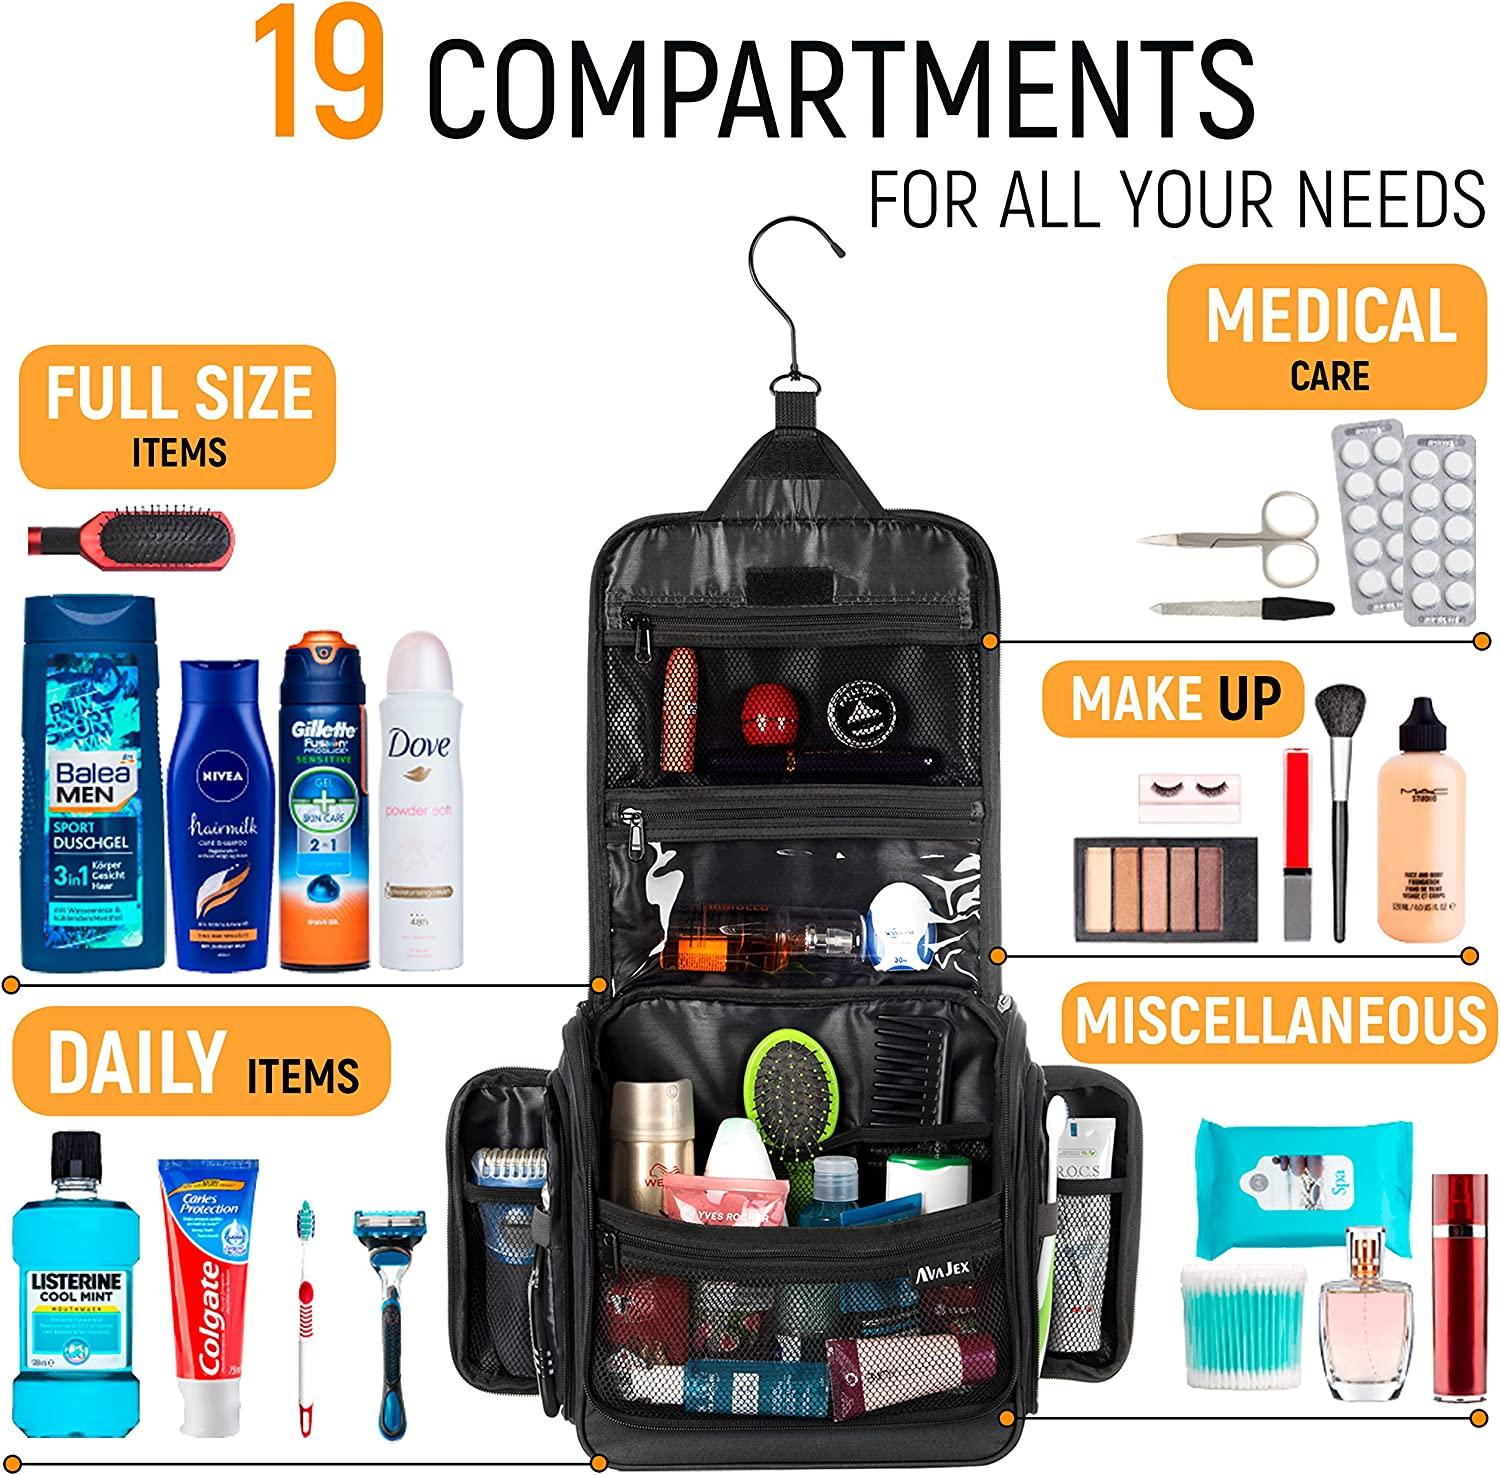 Aimtyd Premium Hanging Toiletry Travel Bag - Cosmetic, Jewelry, Toiletry & Accessory Storage Organizer Bag, Large Size, Various Compartments